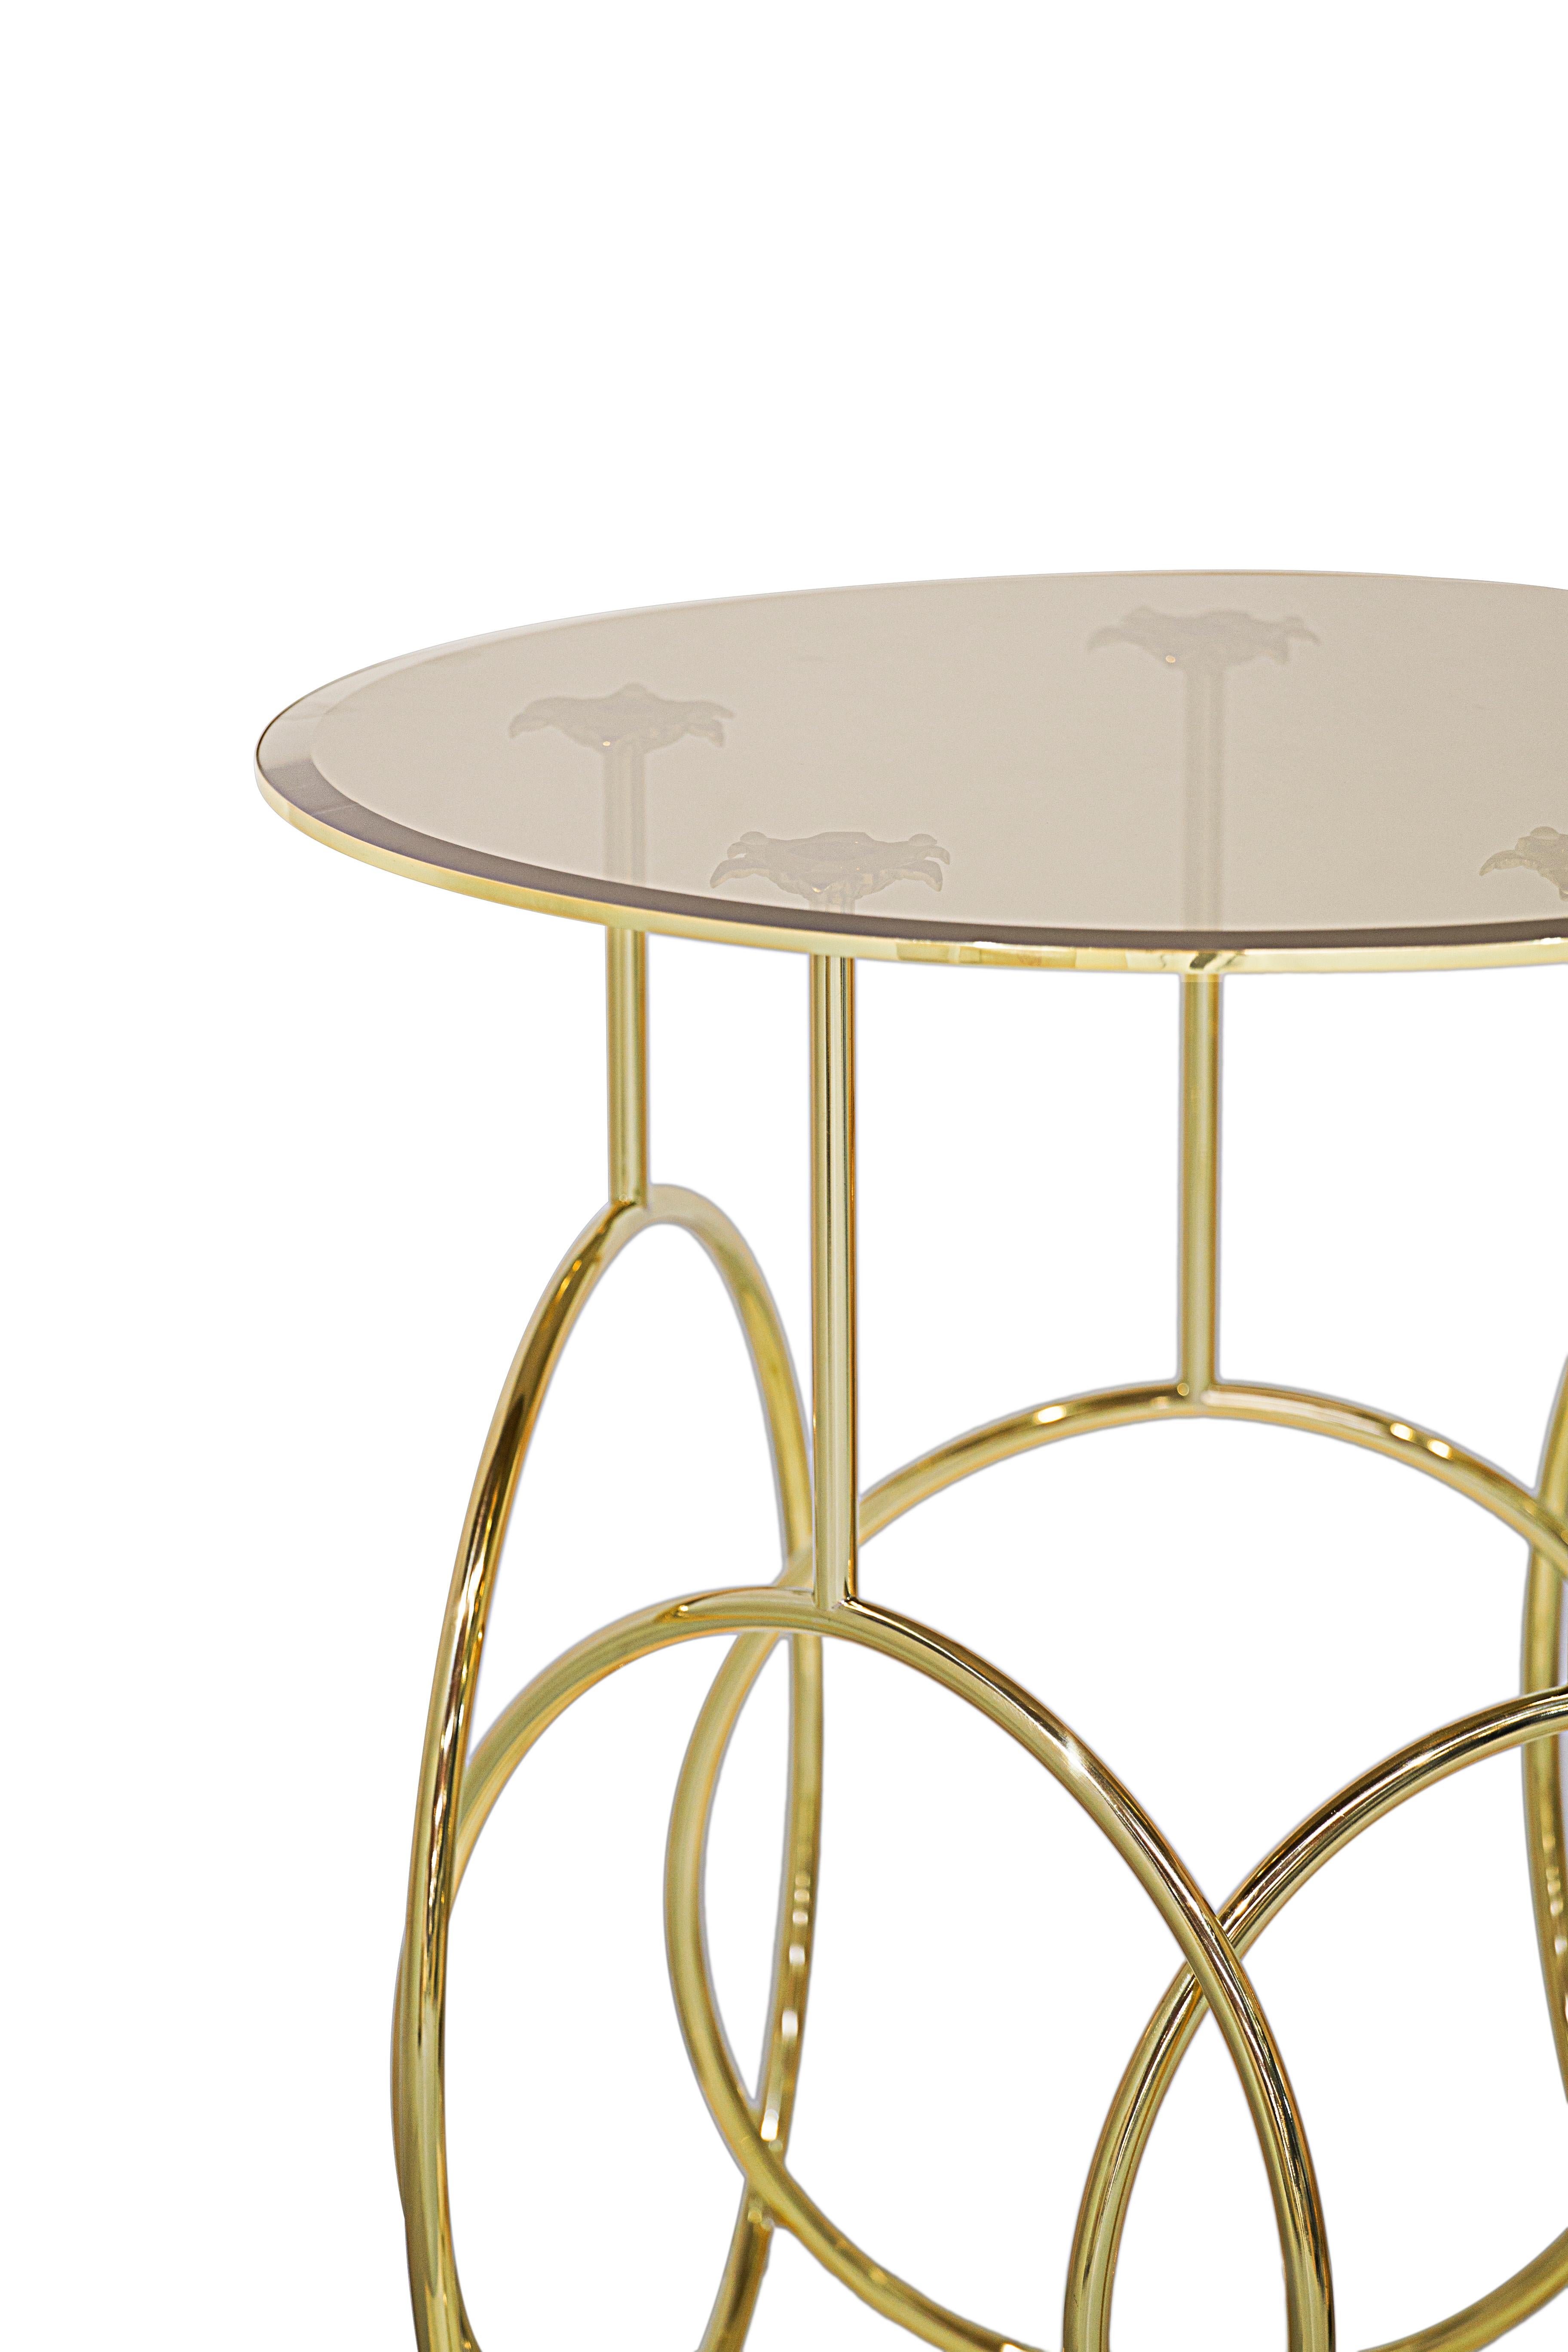 The Kiki side table evokes the romantic and seductive beauty of Parisian cabaret life. The revealing frilled undergarments, the surprise high kicks, the mesmerizing hoops accompanied by blinding splendor give this table a sassy new spin on design.